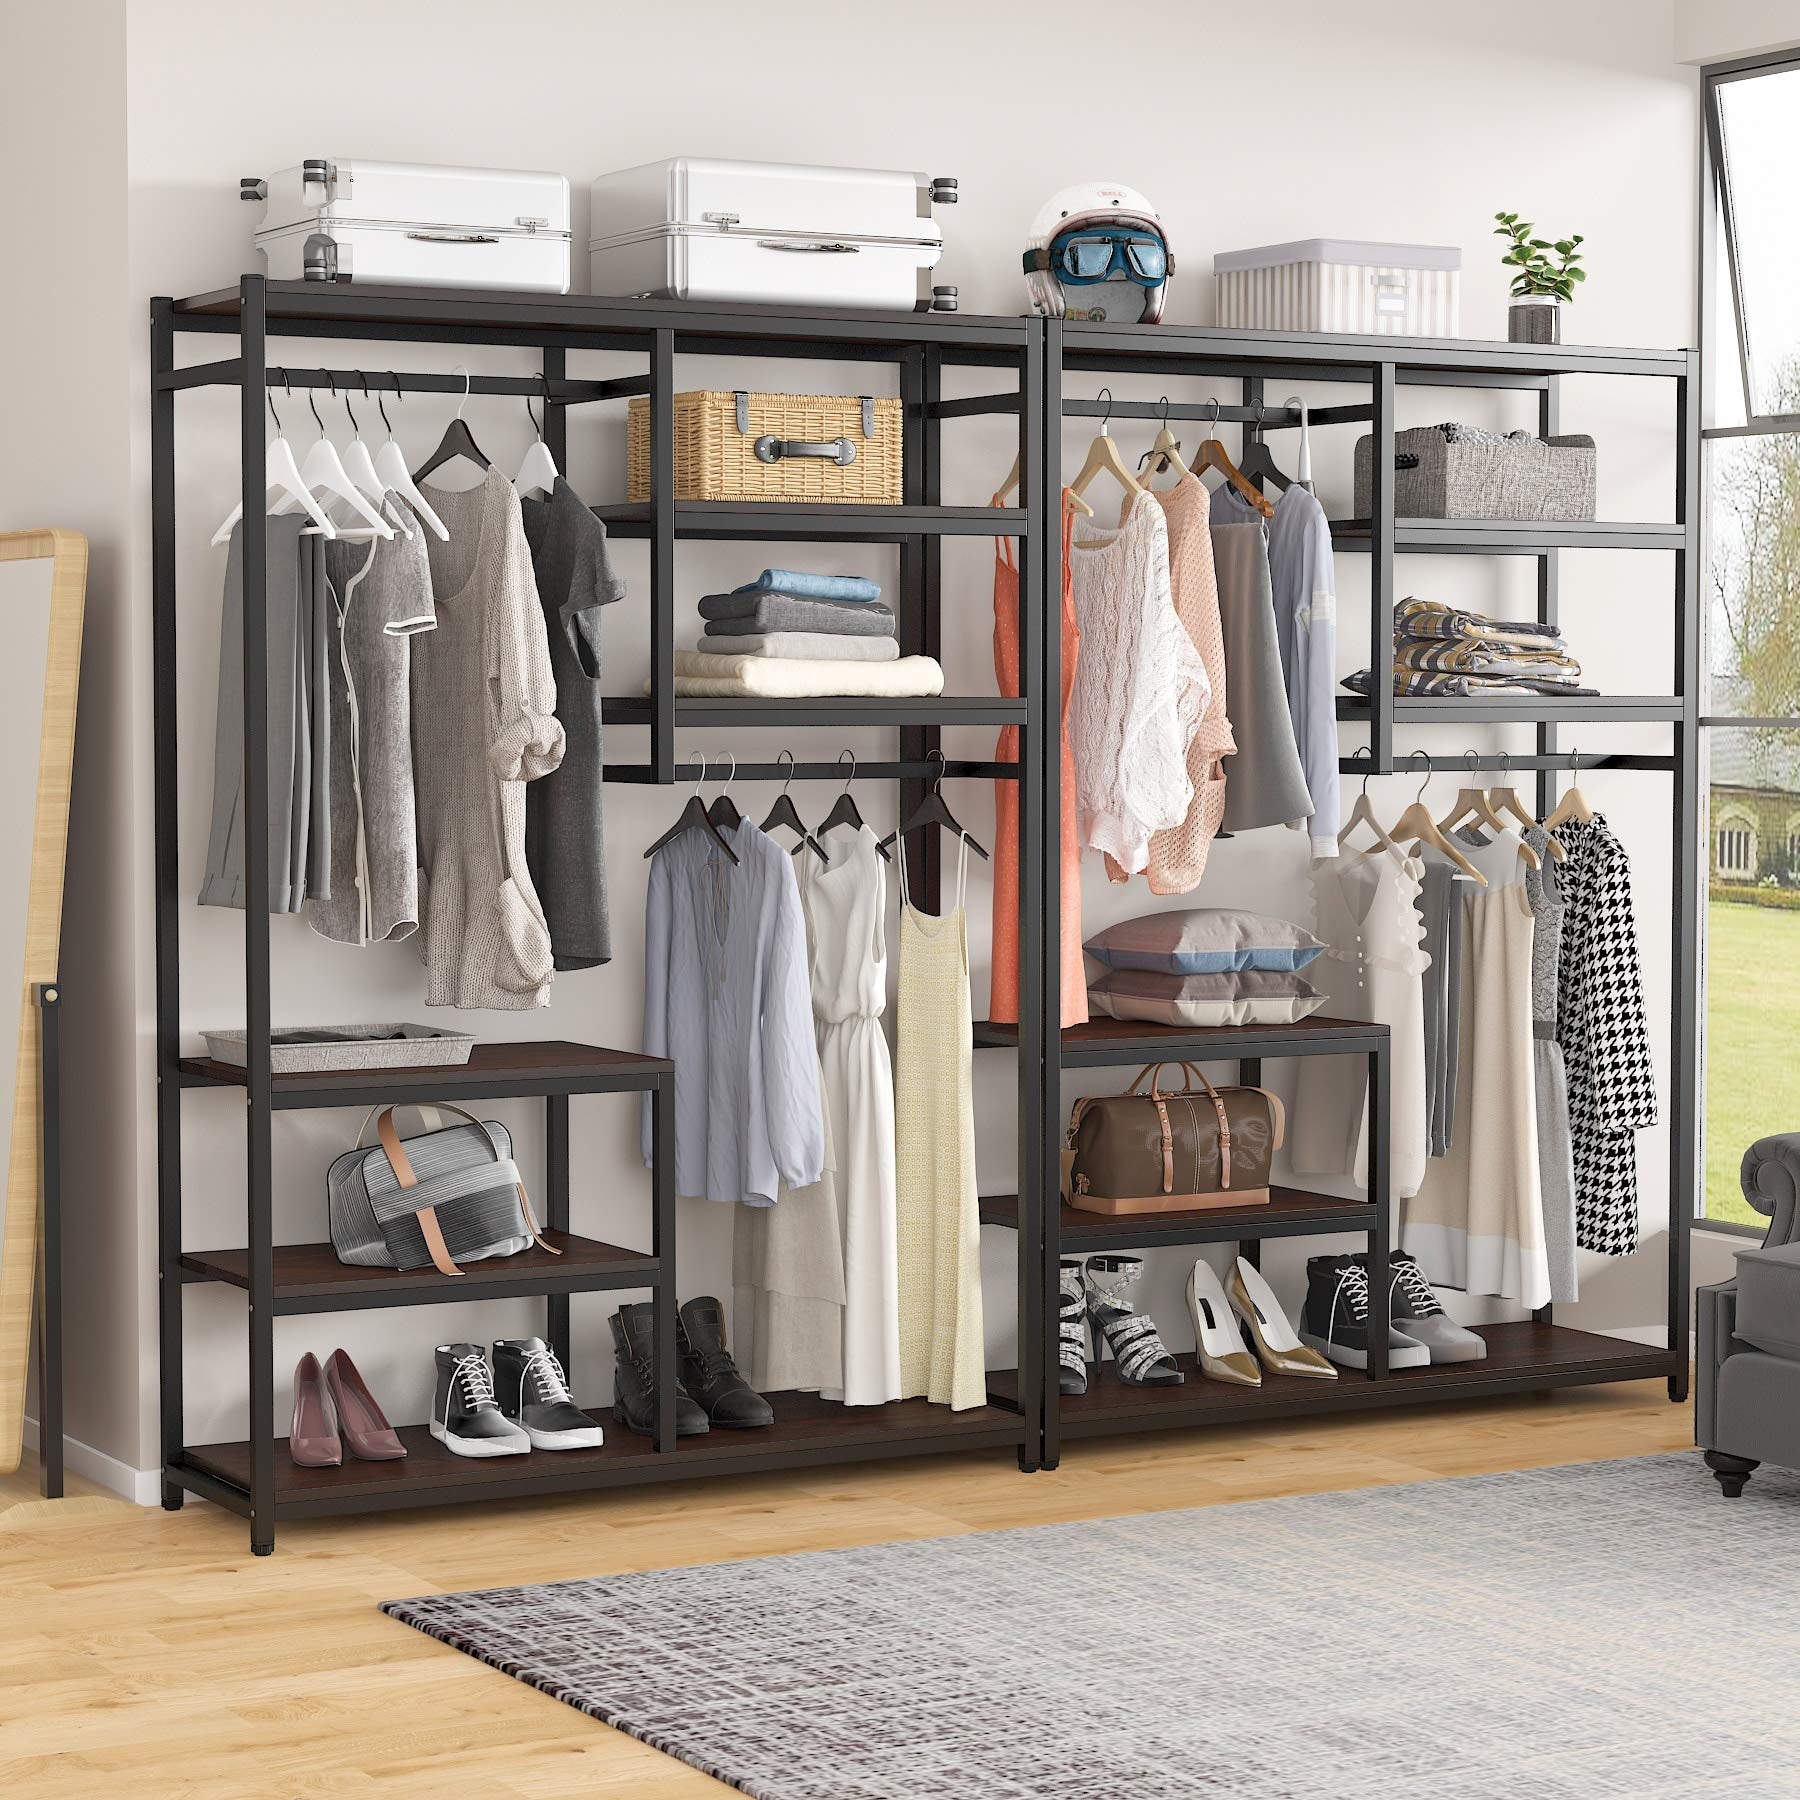 https://ak1.ostkcdn.com/images/products/is/images/direct/3a07f049f8705e01cea0f8976443ab8a450fc80e/Closet-Organizer-Garment-Rack-with-2-Hanging-Rod-and-5-Storage-Shelves.jpg